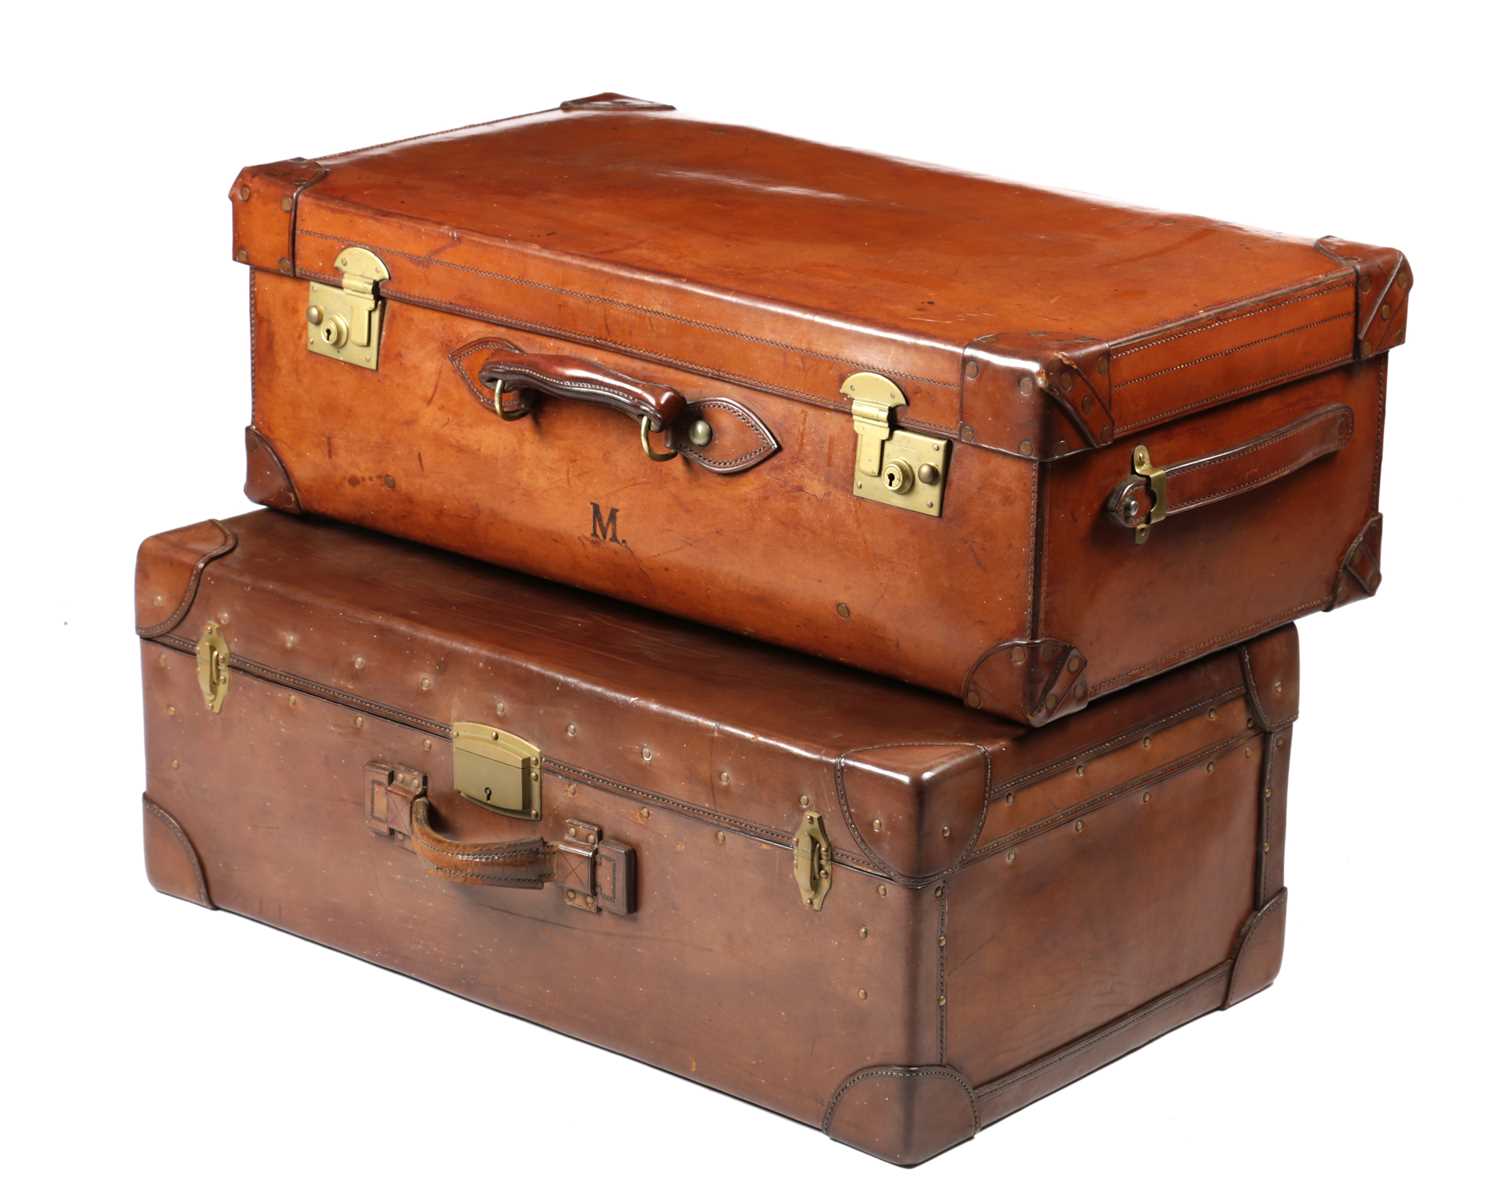 A LARGE BROWN LEATHER SUITCASE EARLY 20TH CENTURY with side handles, a lift-out tray and leather